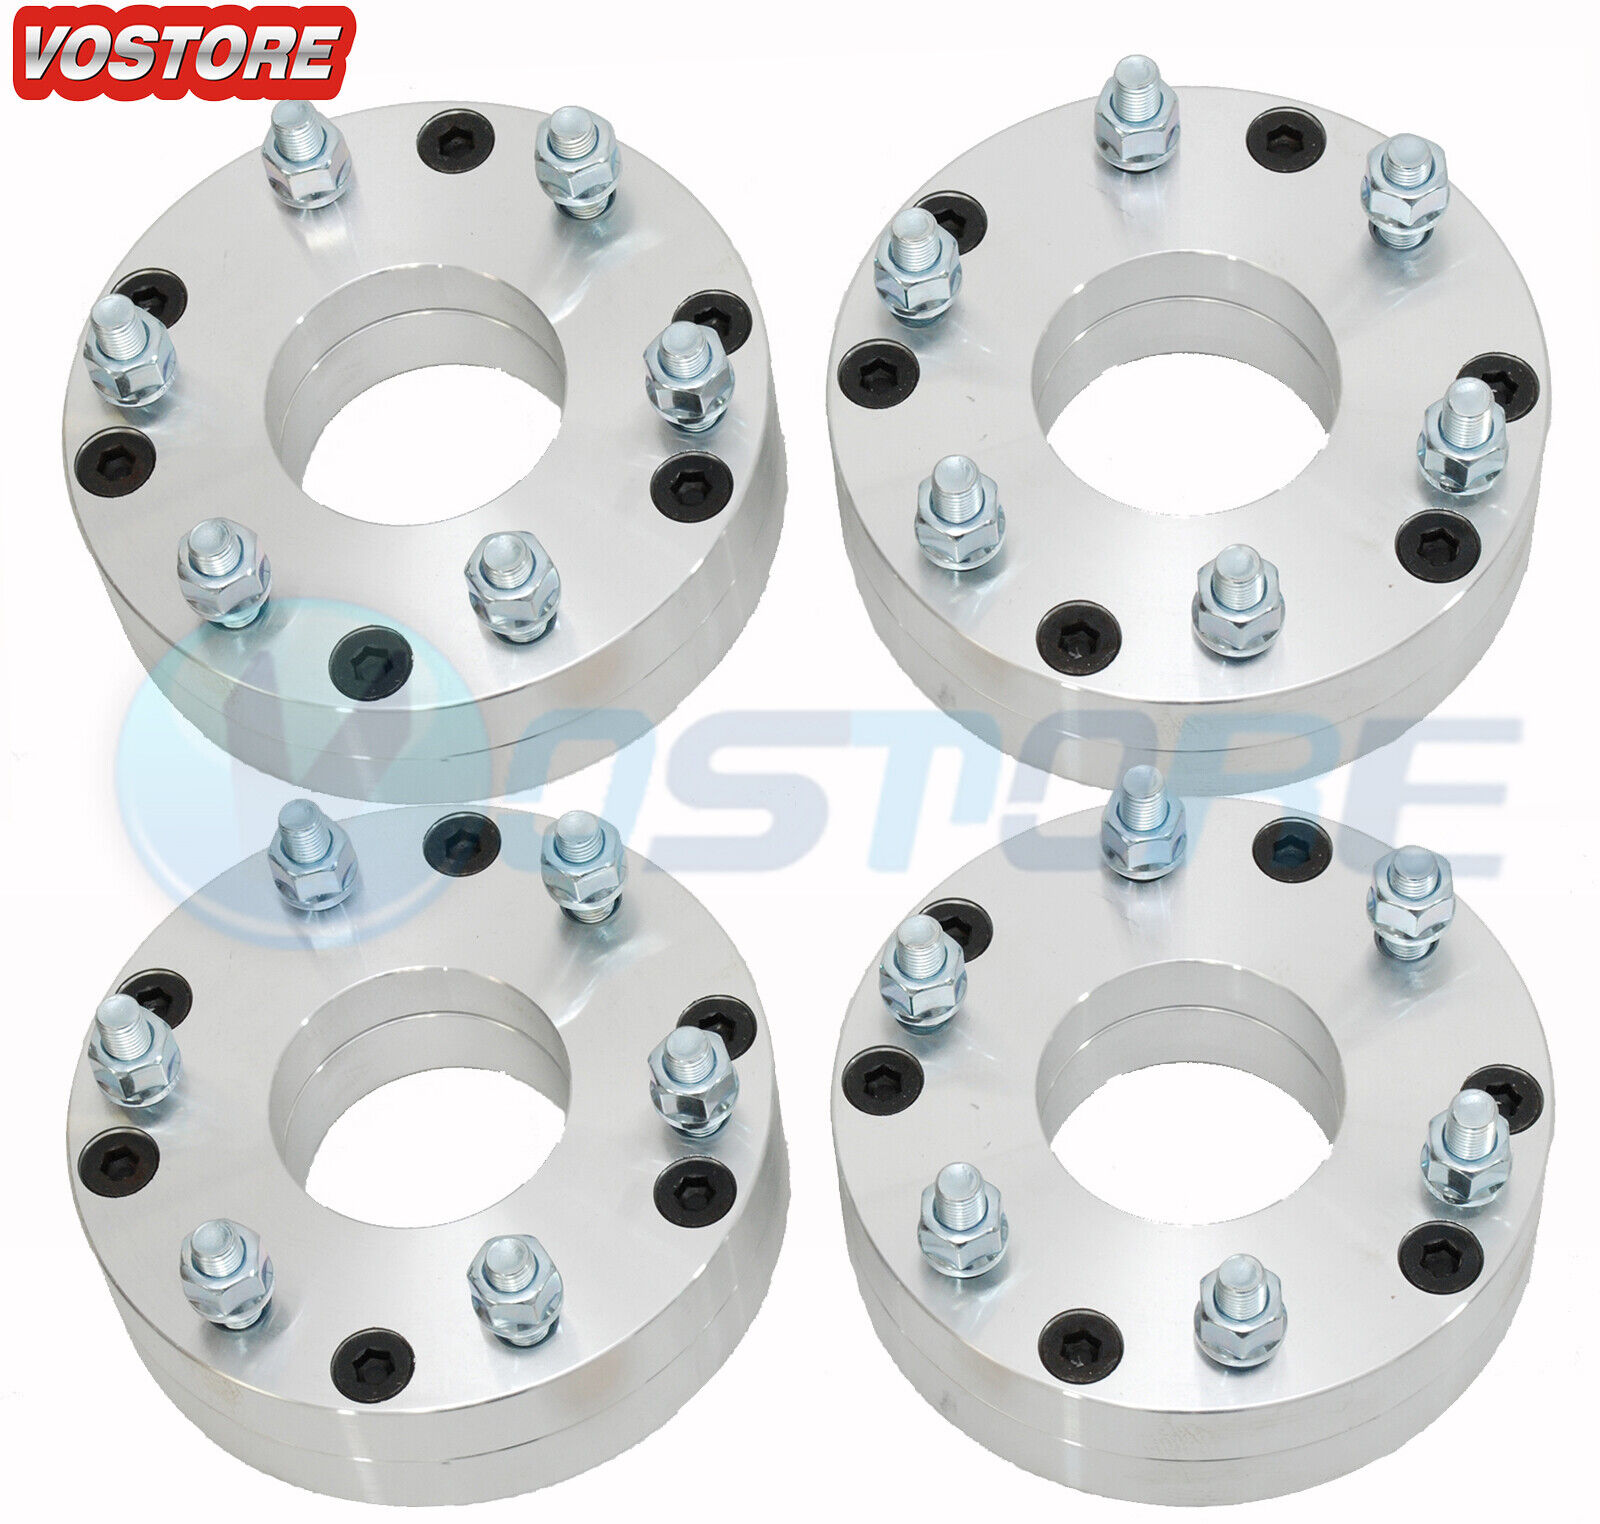 6x5.5 to 5x4.75 Wheel Adapters 2